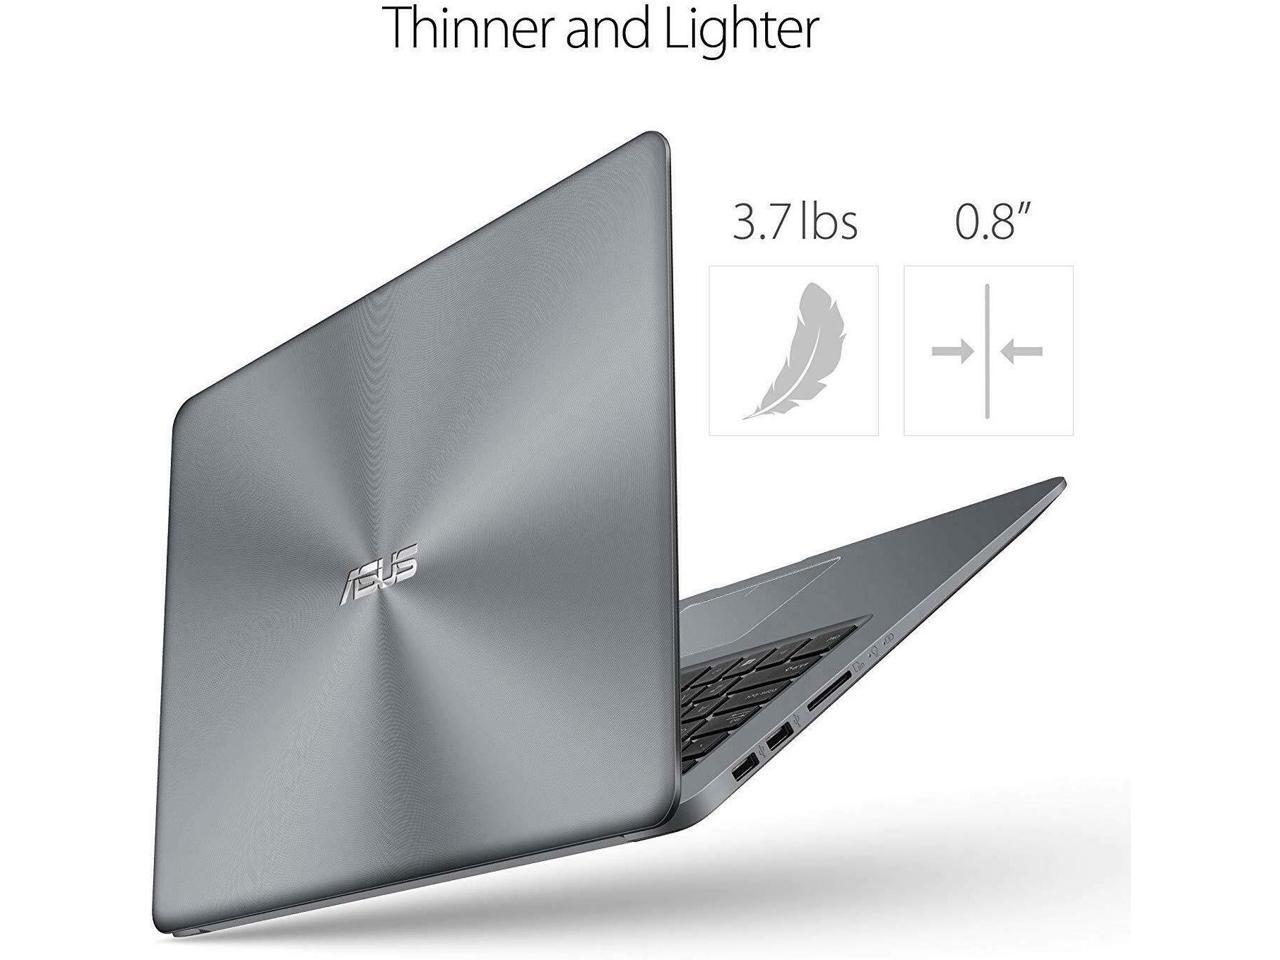 Newest Asus VivoBook Thin & Lightweight Laptop (12G DDR4/512G SSD+1TB HDD)|15.6" Full HD(1920x1080) WideView display| AMD Quad Core A12-9720P Processor| Wi-Fi |Fingerprint Reader|Windows 10 in S Mode